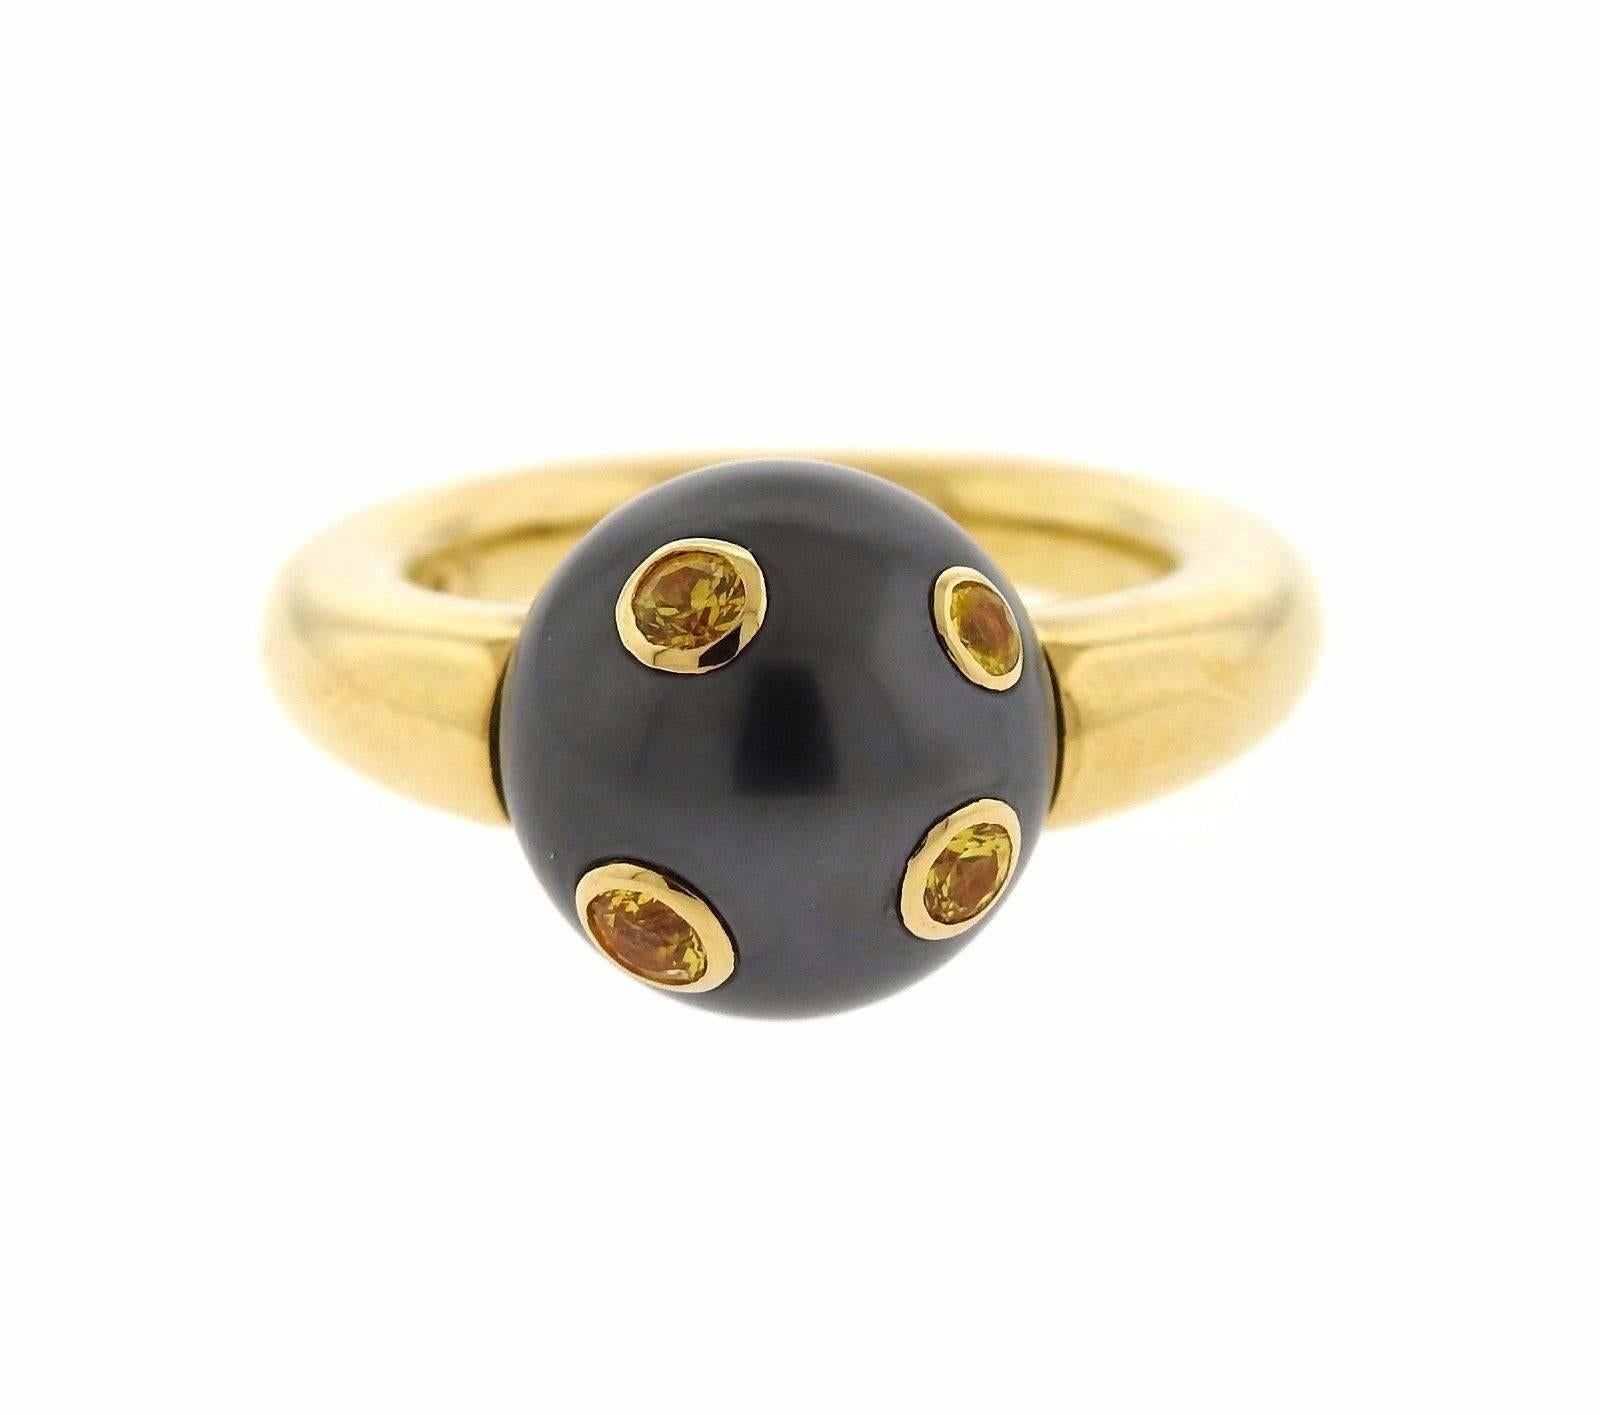 An 18k yellow gold ring set with a 12.5mm Tahitian pearl and yellow sapphires.  The ring is a size 6.25 and the shank is 5.2mm wide.  The weight of the ring is 12.4 grams.  Marked: M, 750 Made in Italy.  Comes with box and papers.  Current retail is